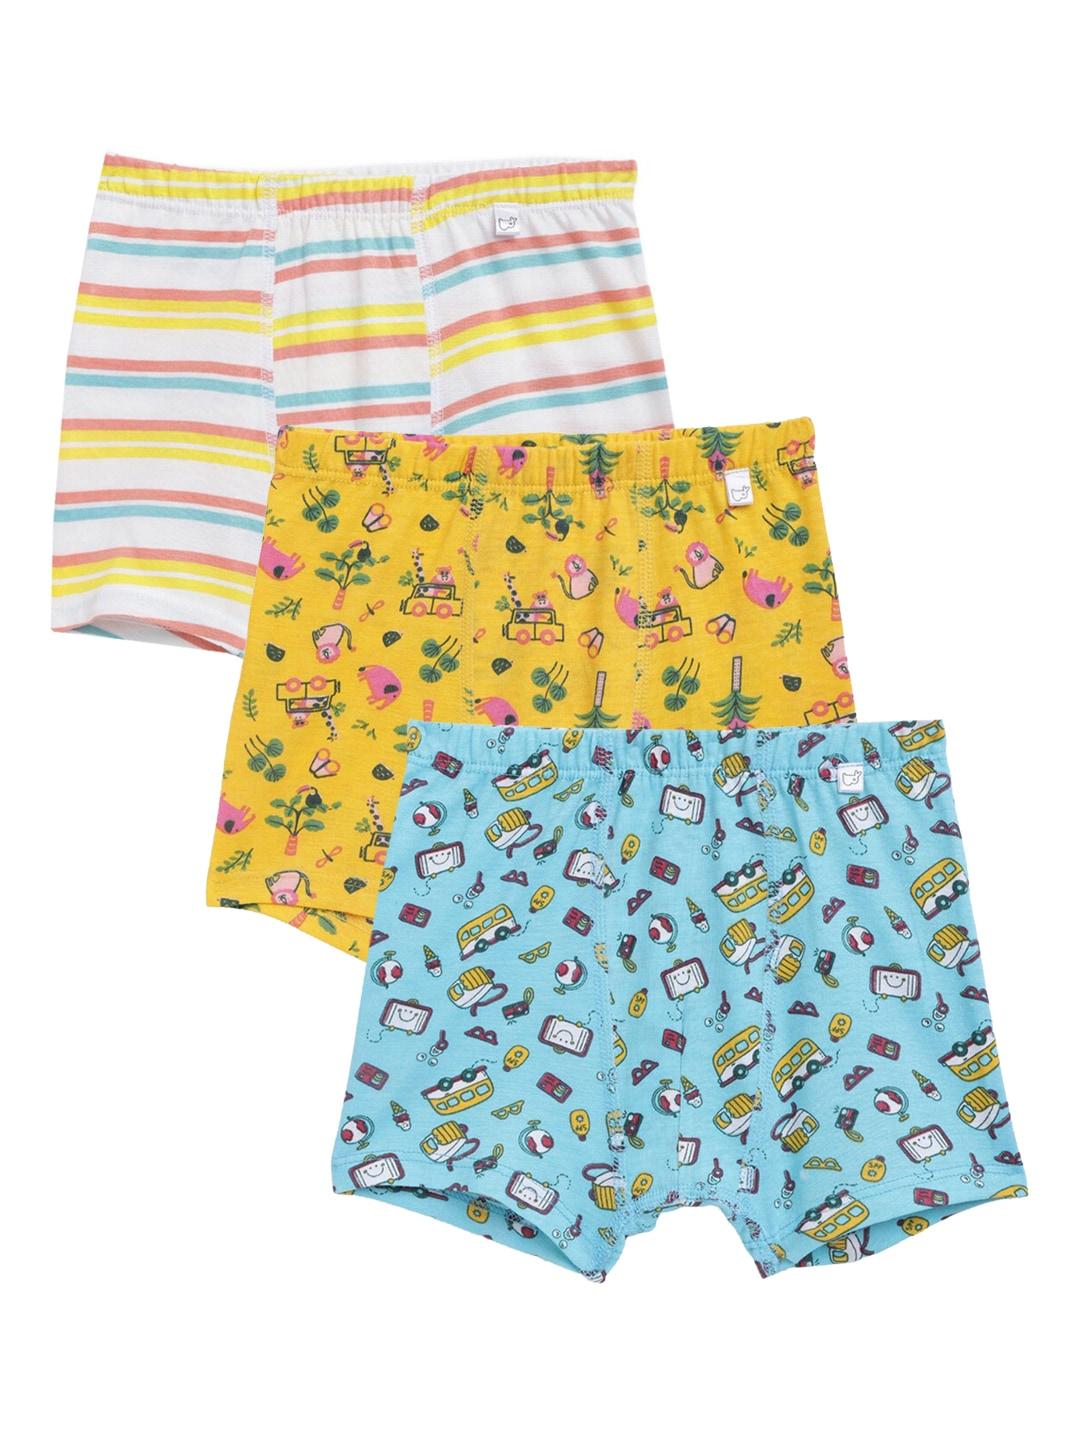 superbottoms-pack-of-3-yellow-&-blue-printed-boys-briefs